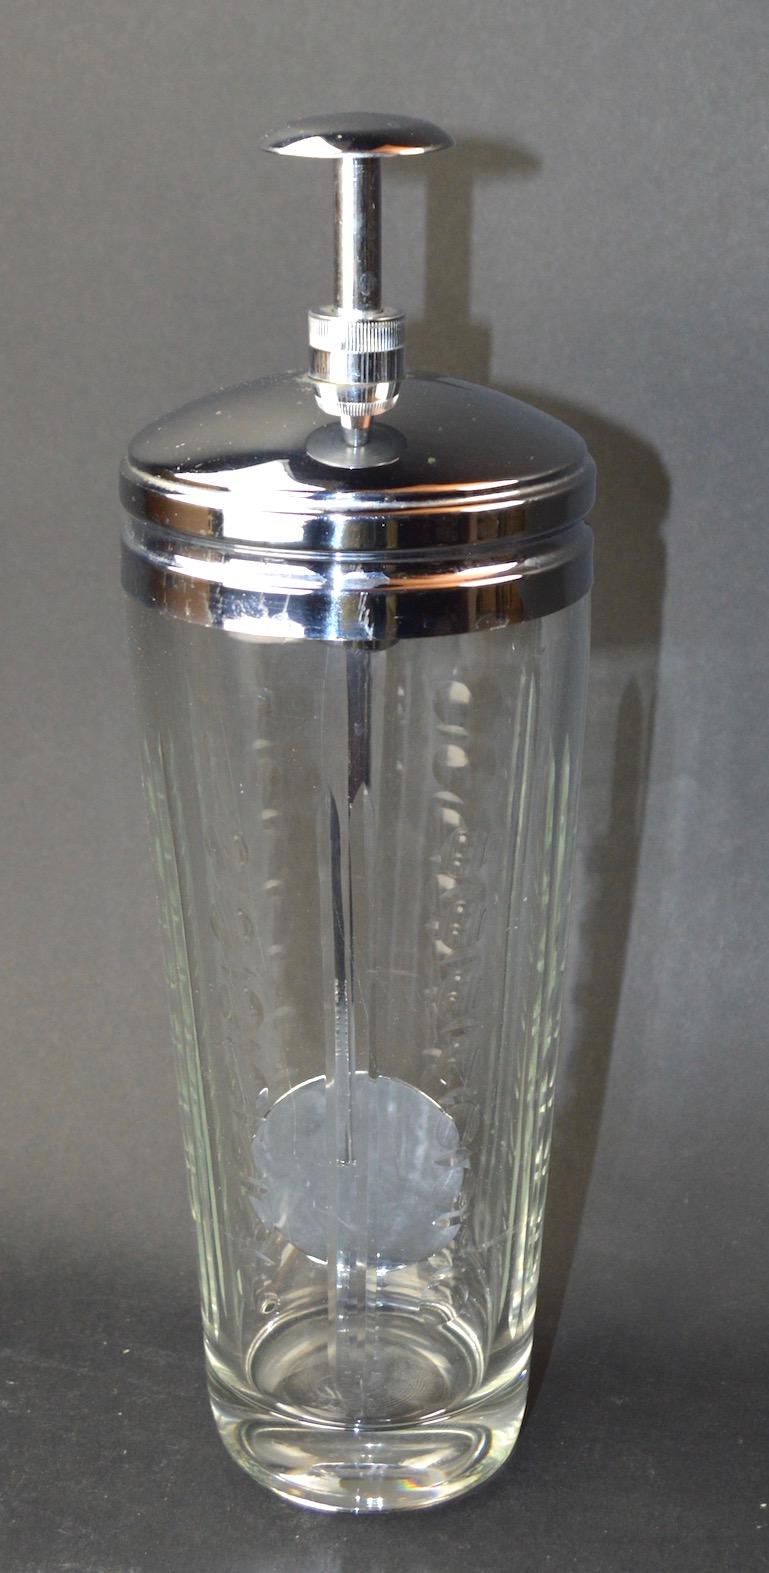 Etched and pressed glass body with bright chrome CAP and mechanical twist mixer element. Push the top knob down and the chrome paddle will spin, making the perfect mixed drink every time. Great novelty item form the Machine Age period, bears pat.